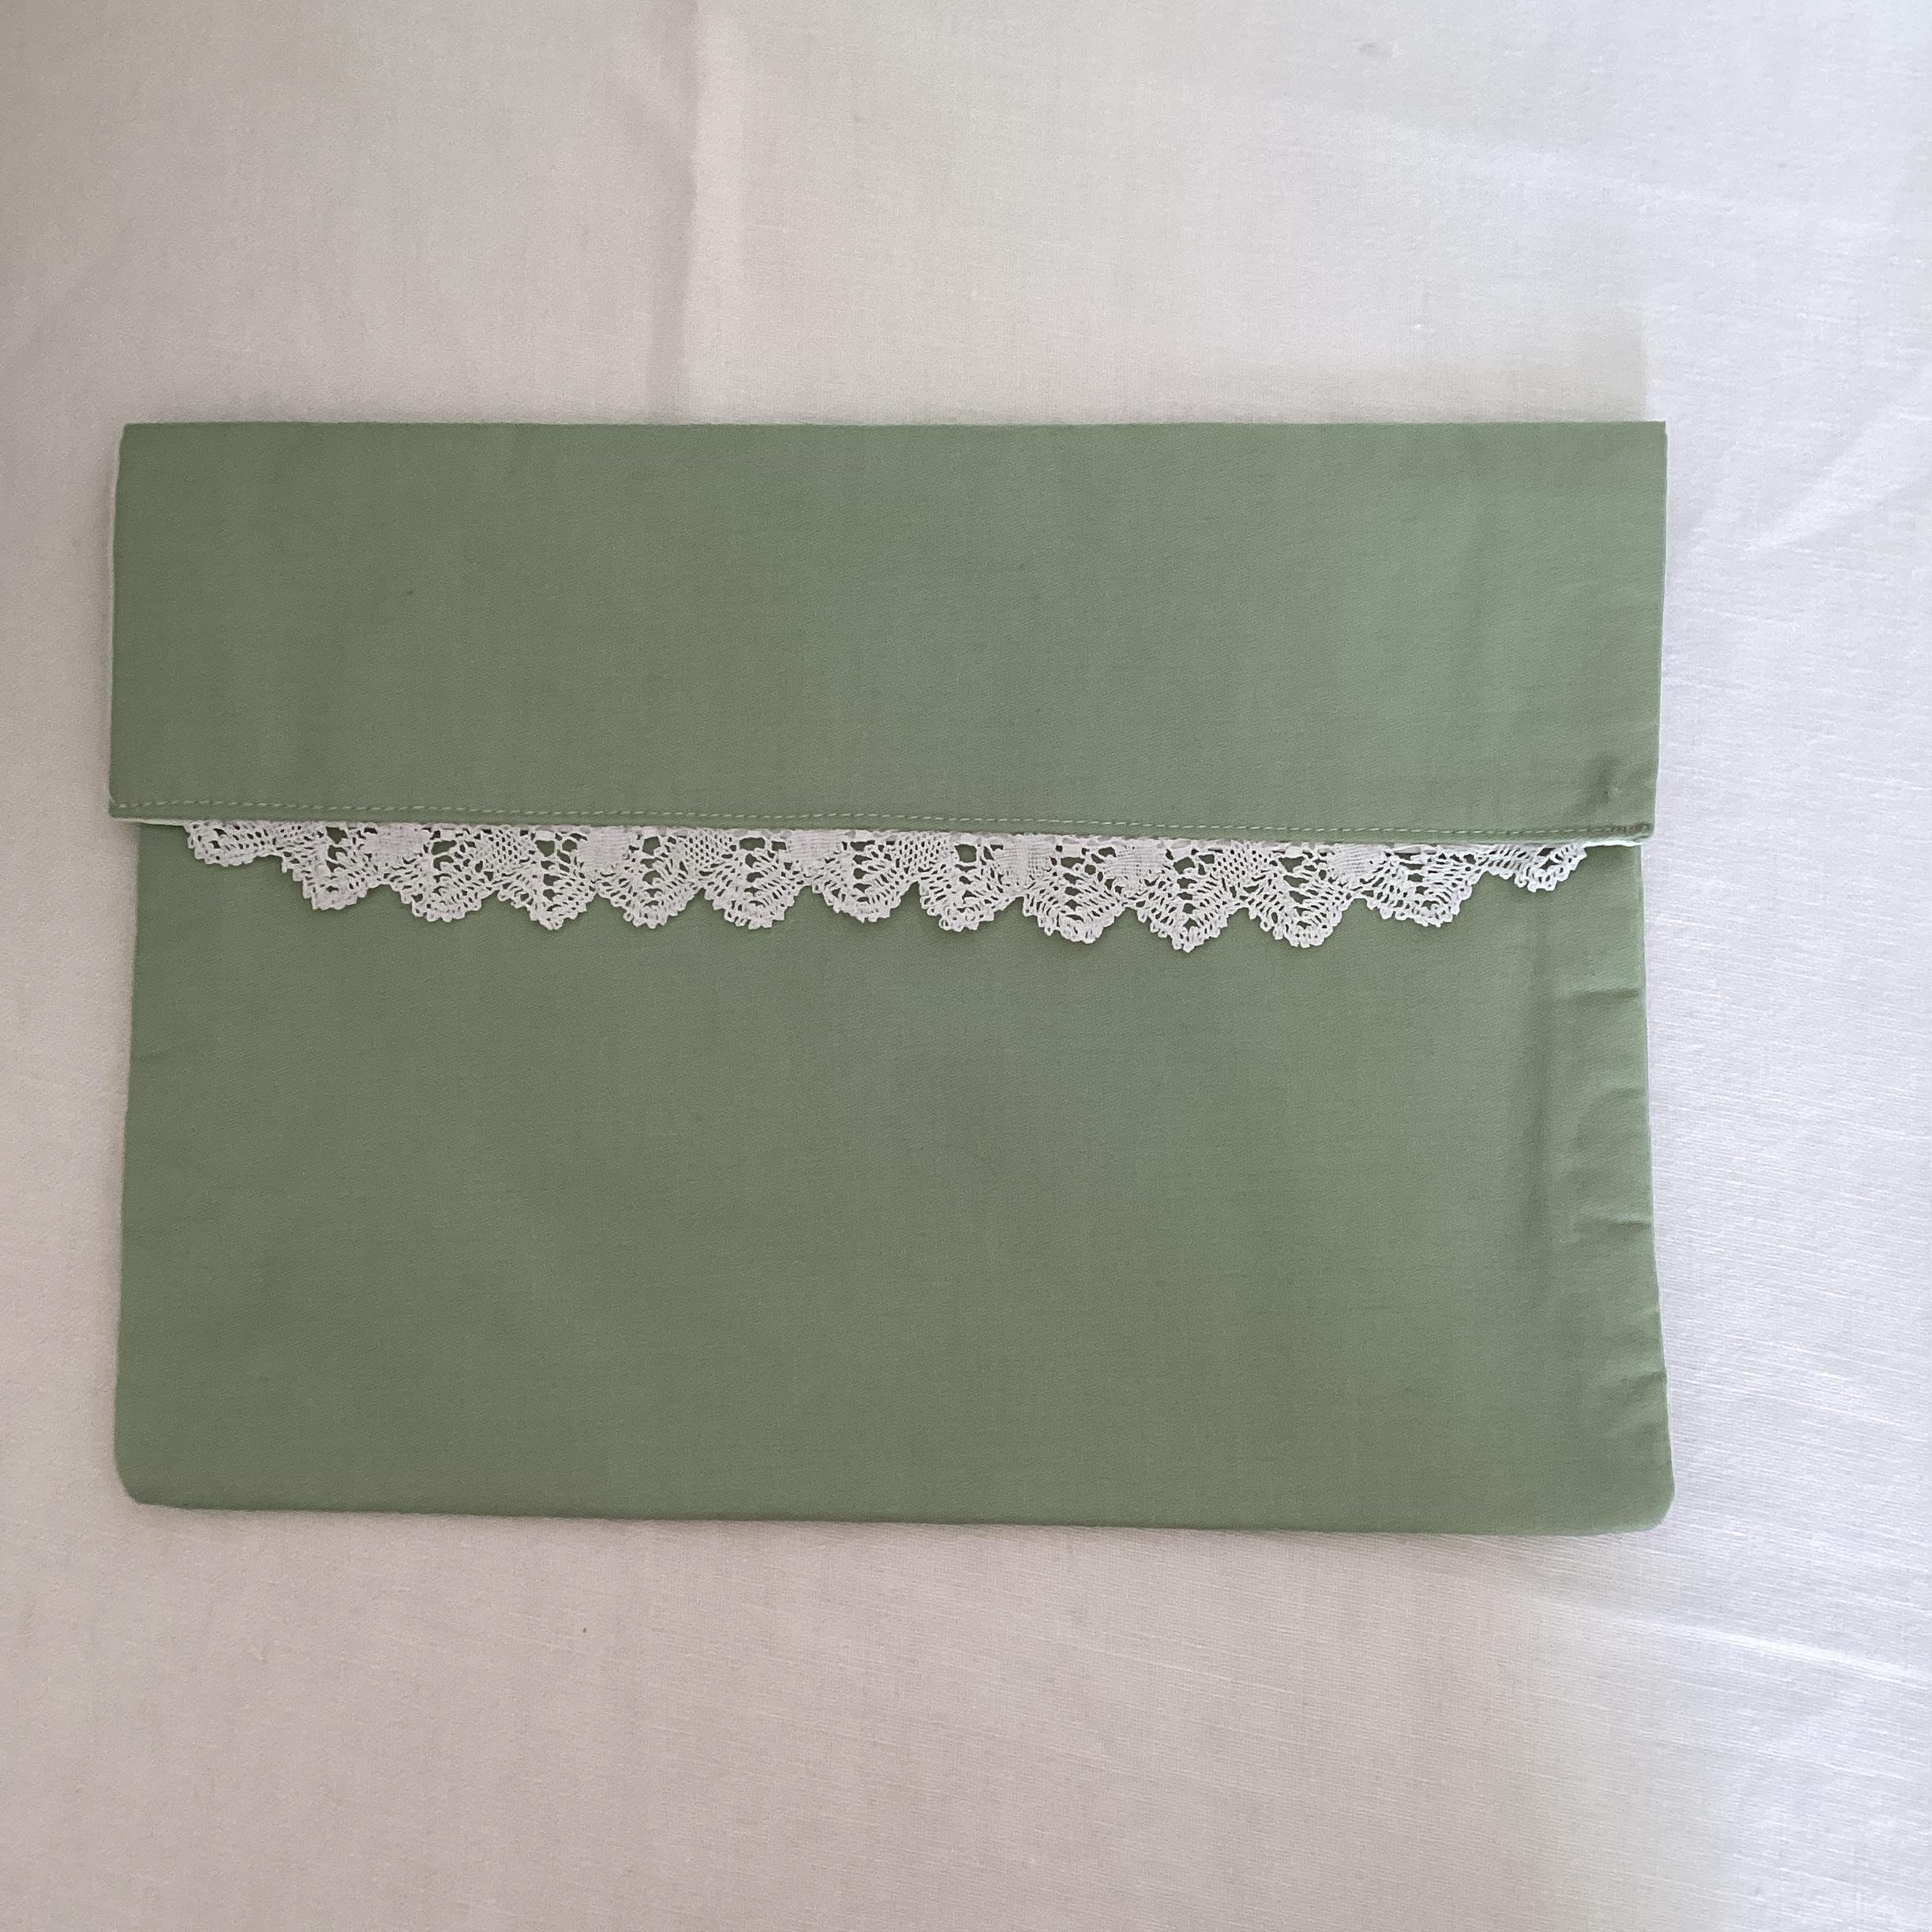 Handkerchief Pouch - green with lace